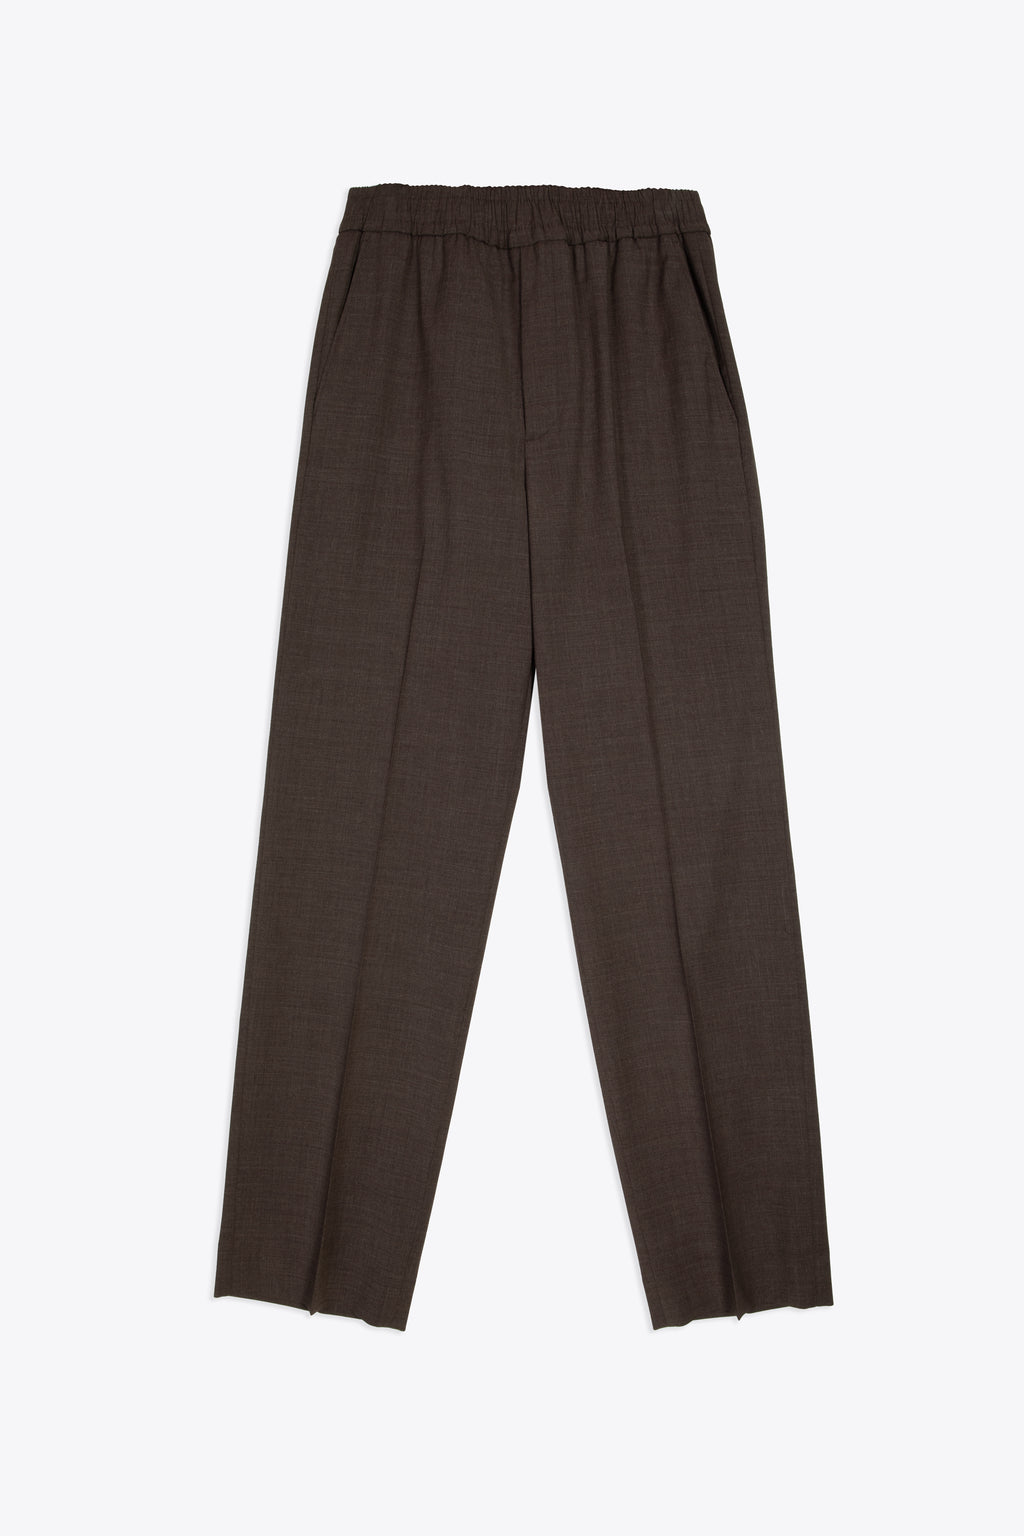 alt-image__Brown-wool-blend-relaxed-pant-with-elastic-waistband